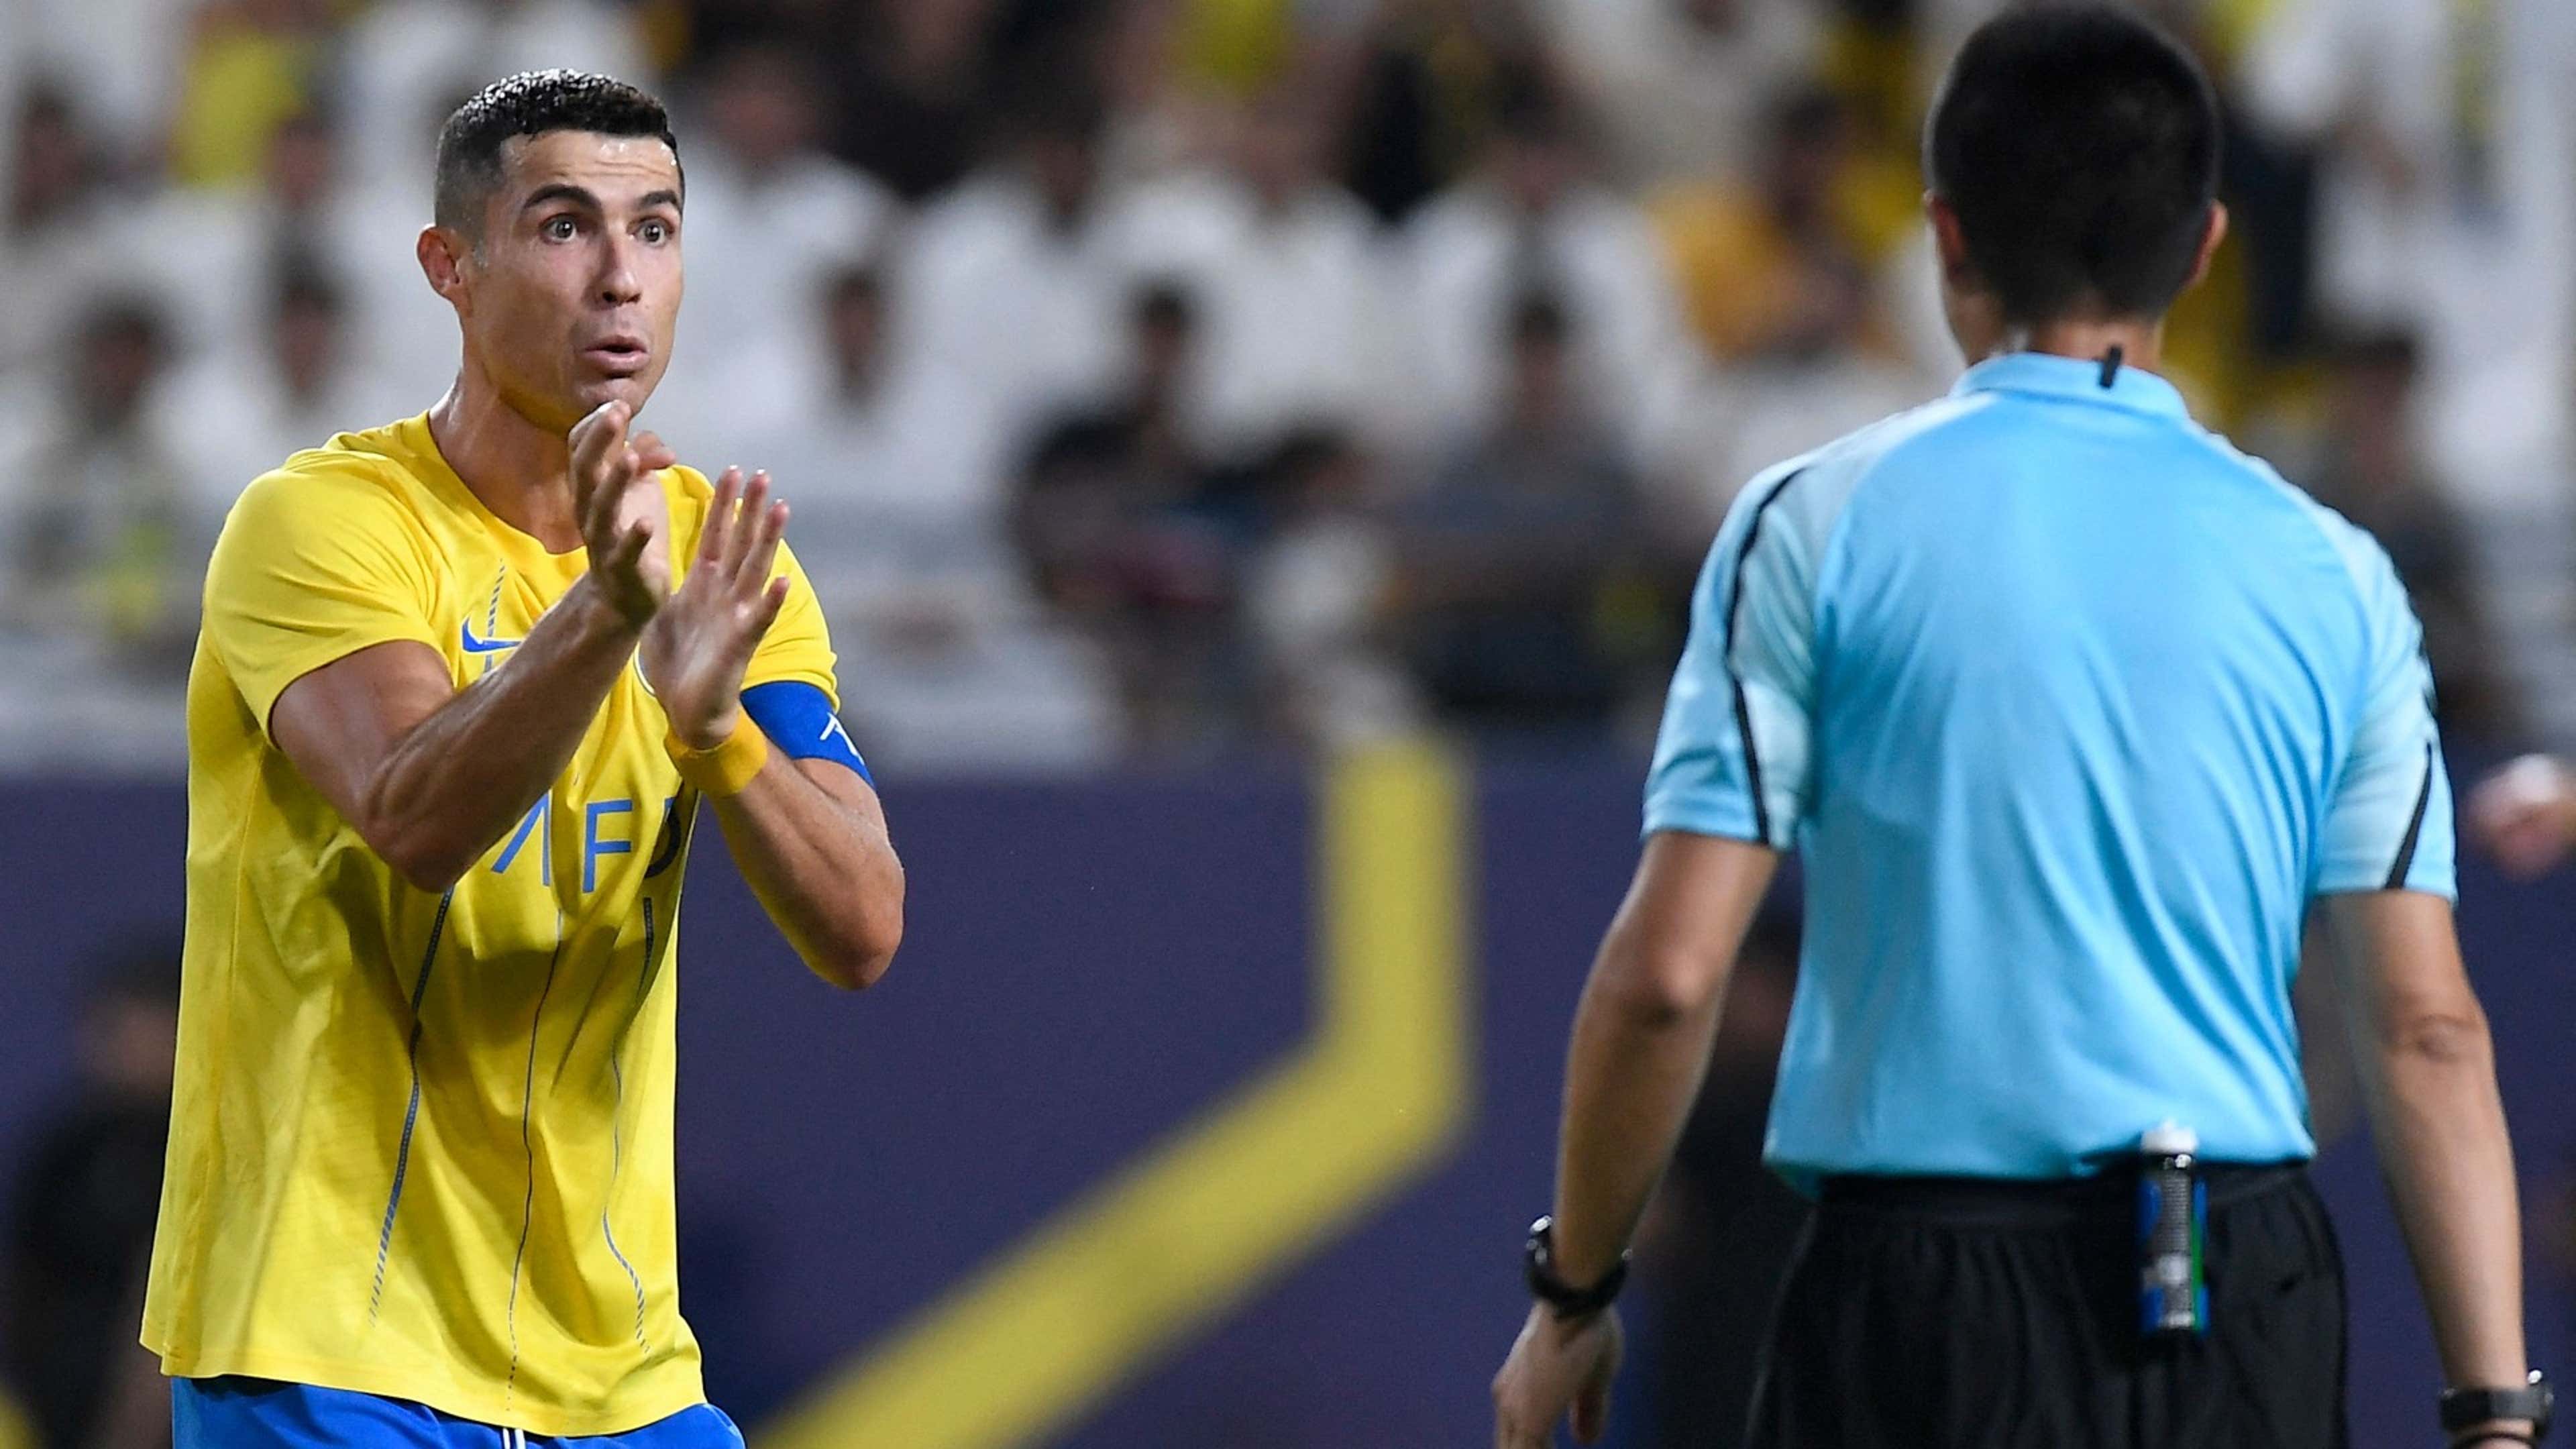 Cristiano Ronaldo shares photo attempting overhead kick on Al-Nassr debut..  but he missed the ball and booted player